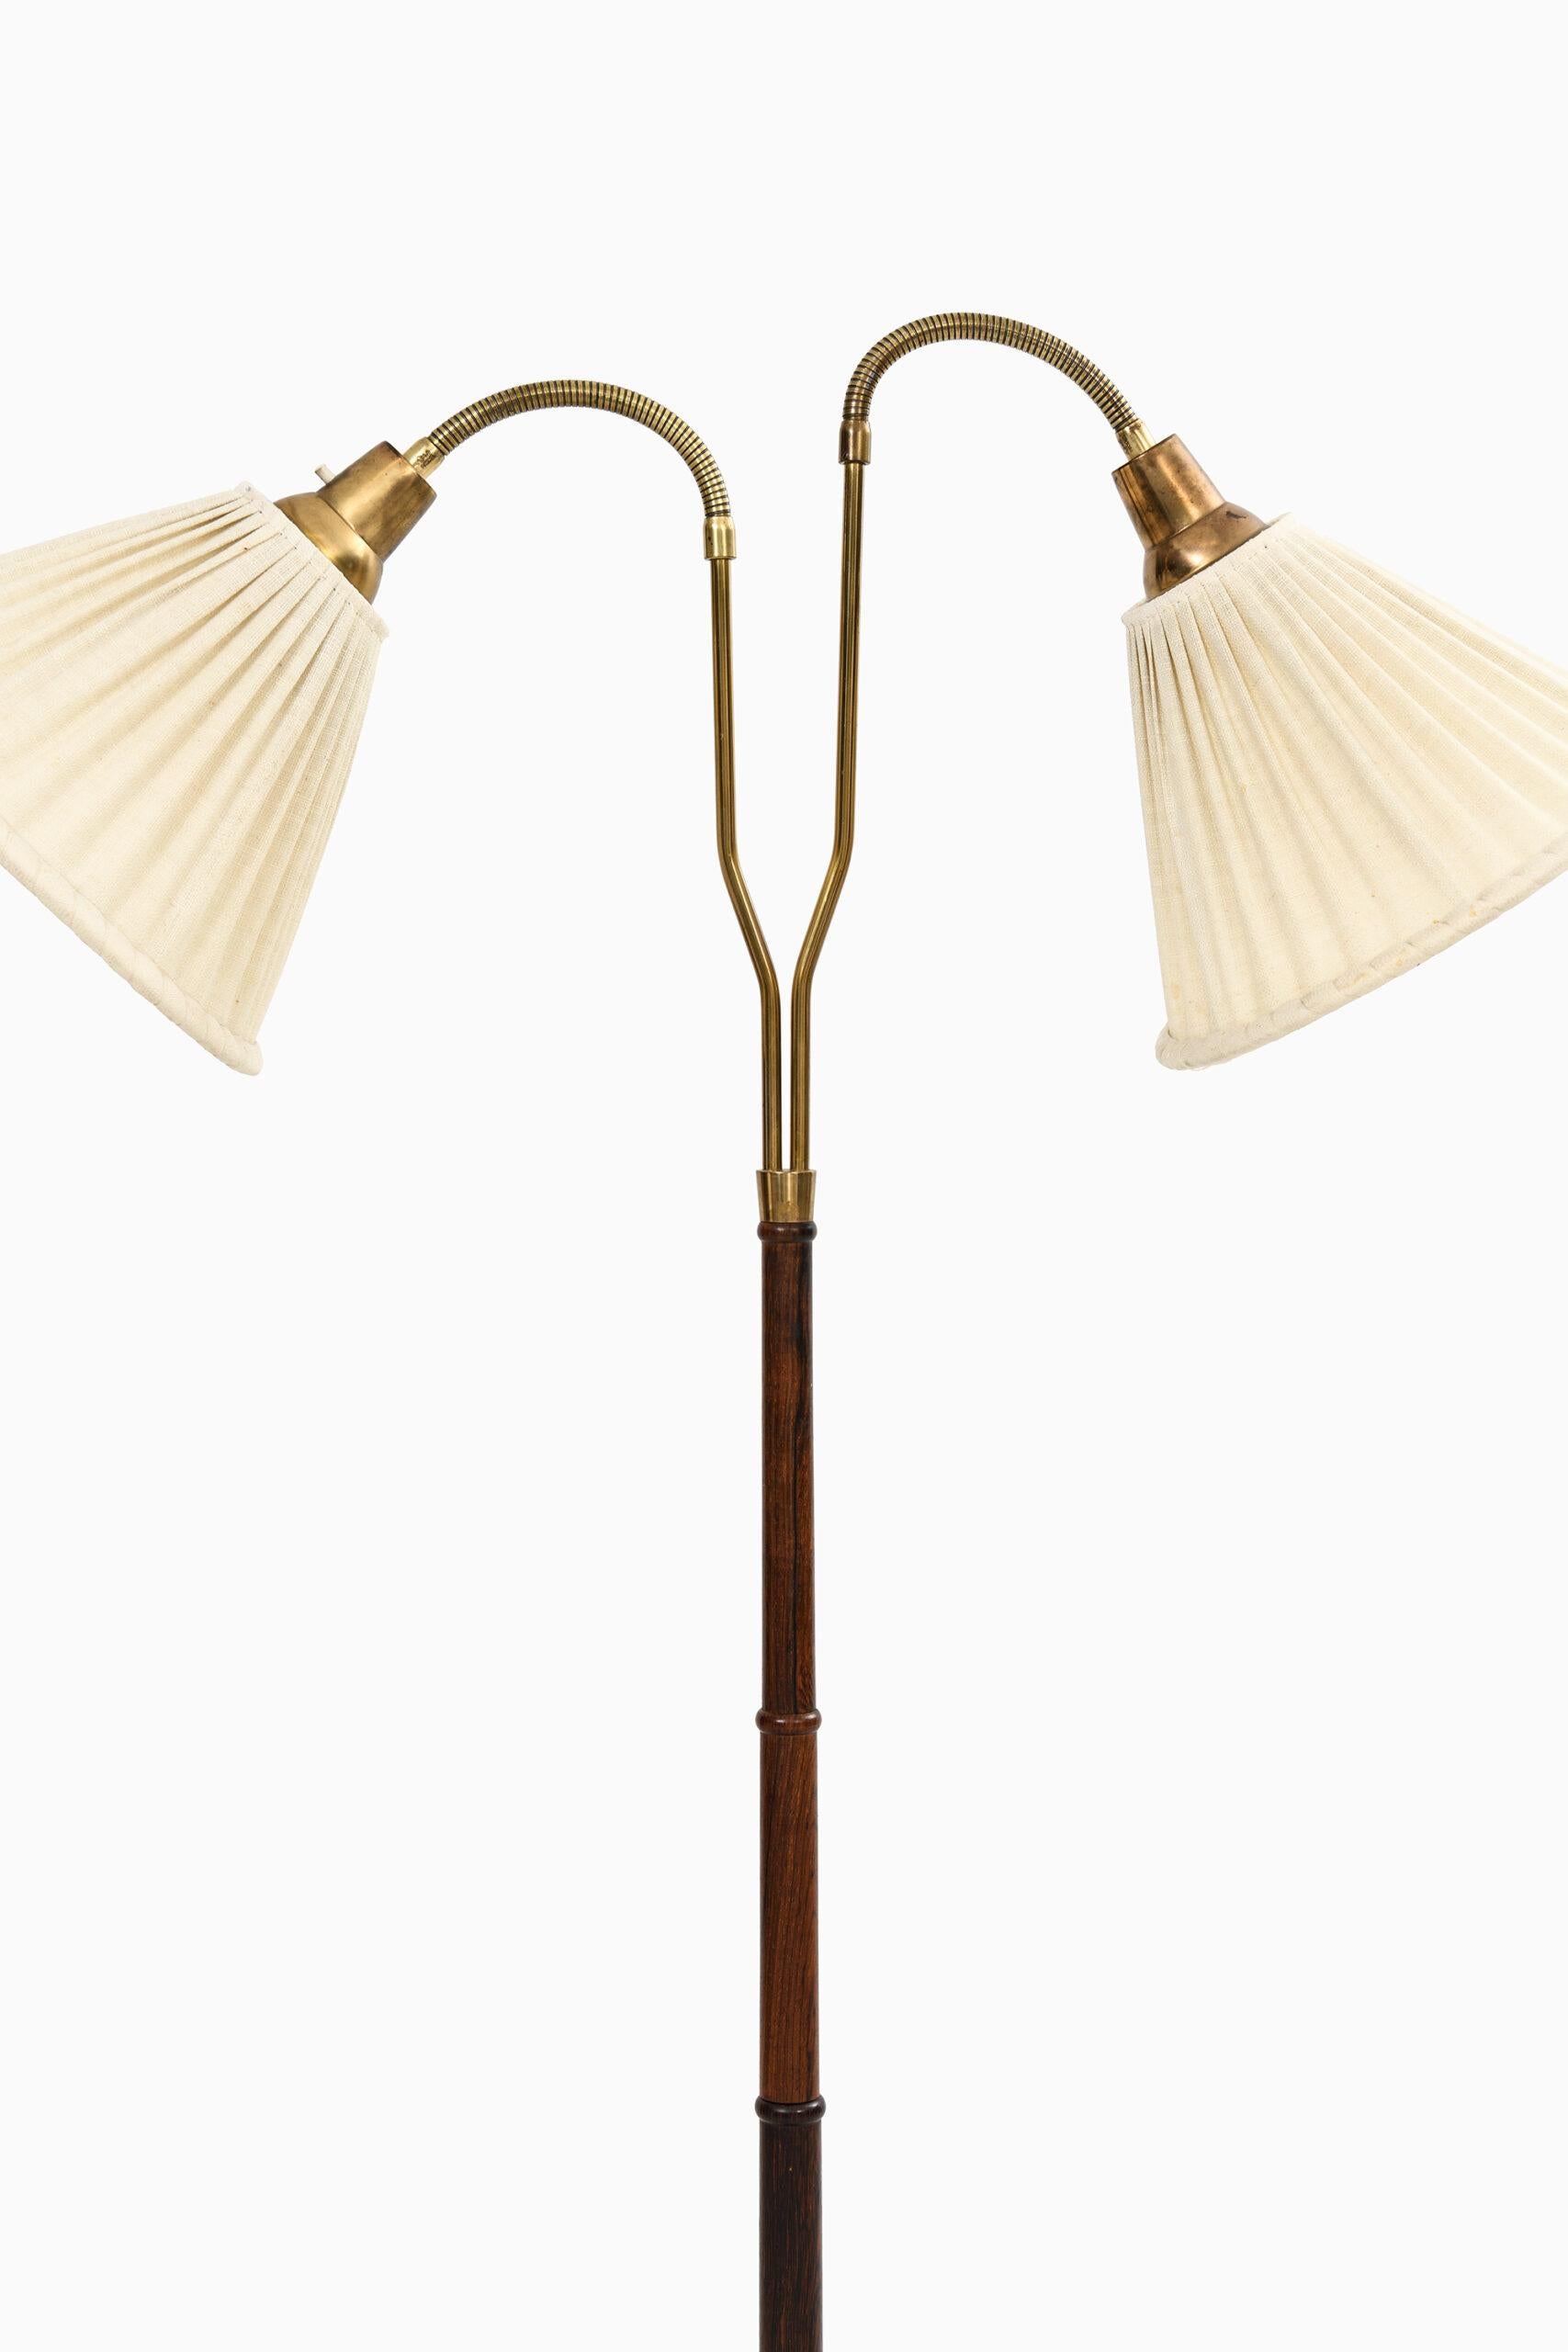 Floor lamp by unknown designer. Produced by Falkenbergs Belysning in Sweden.